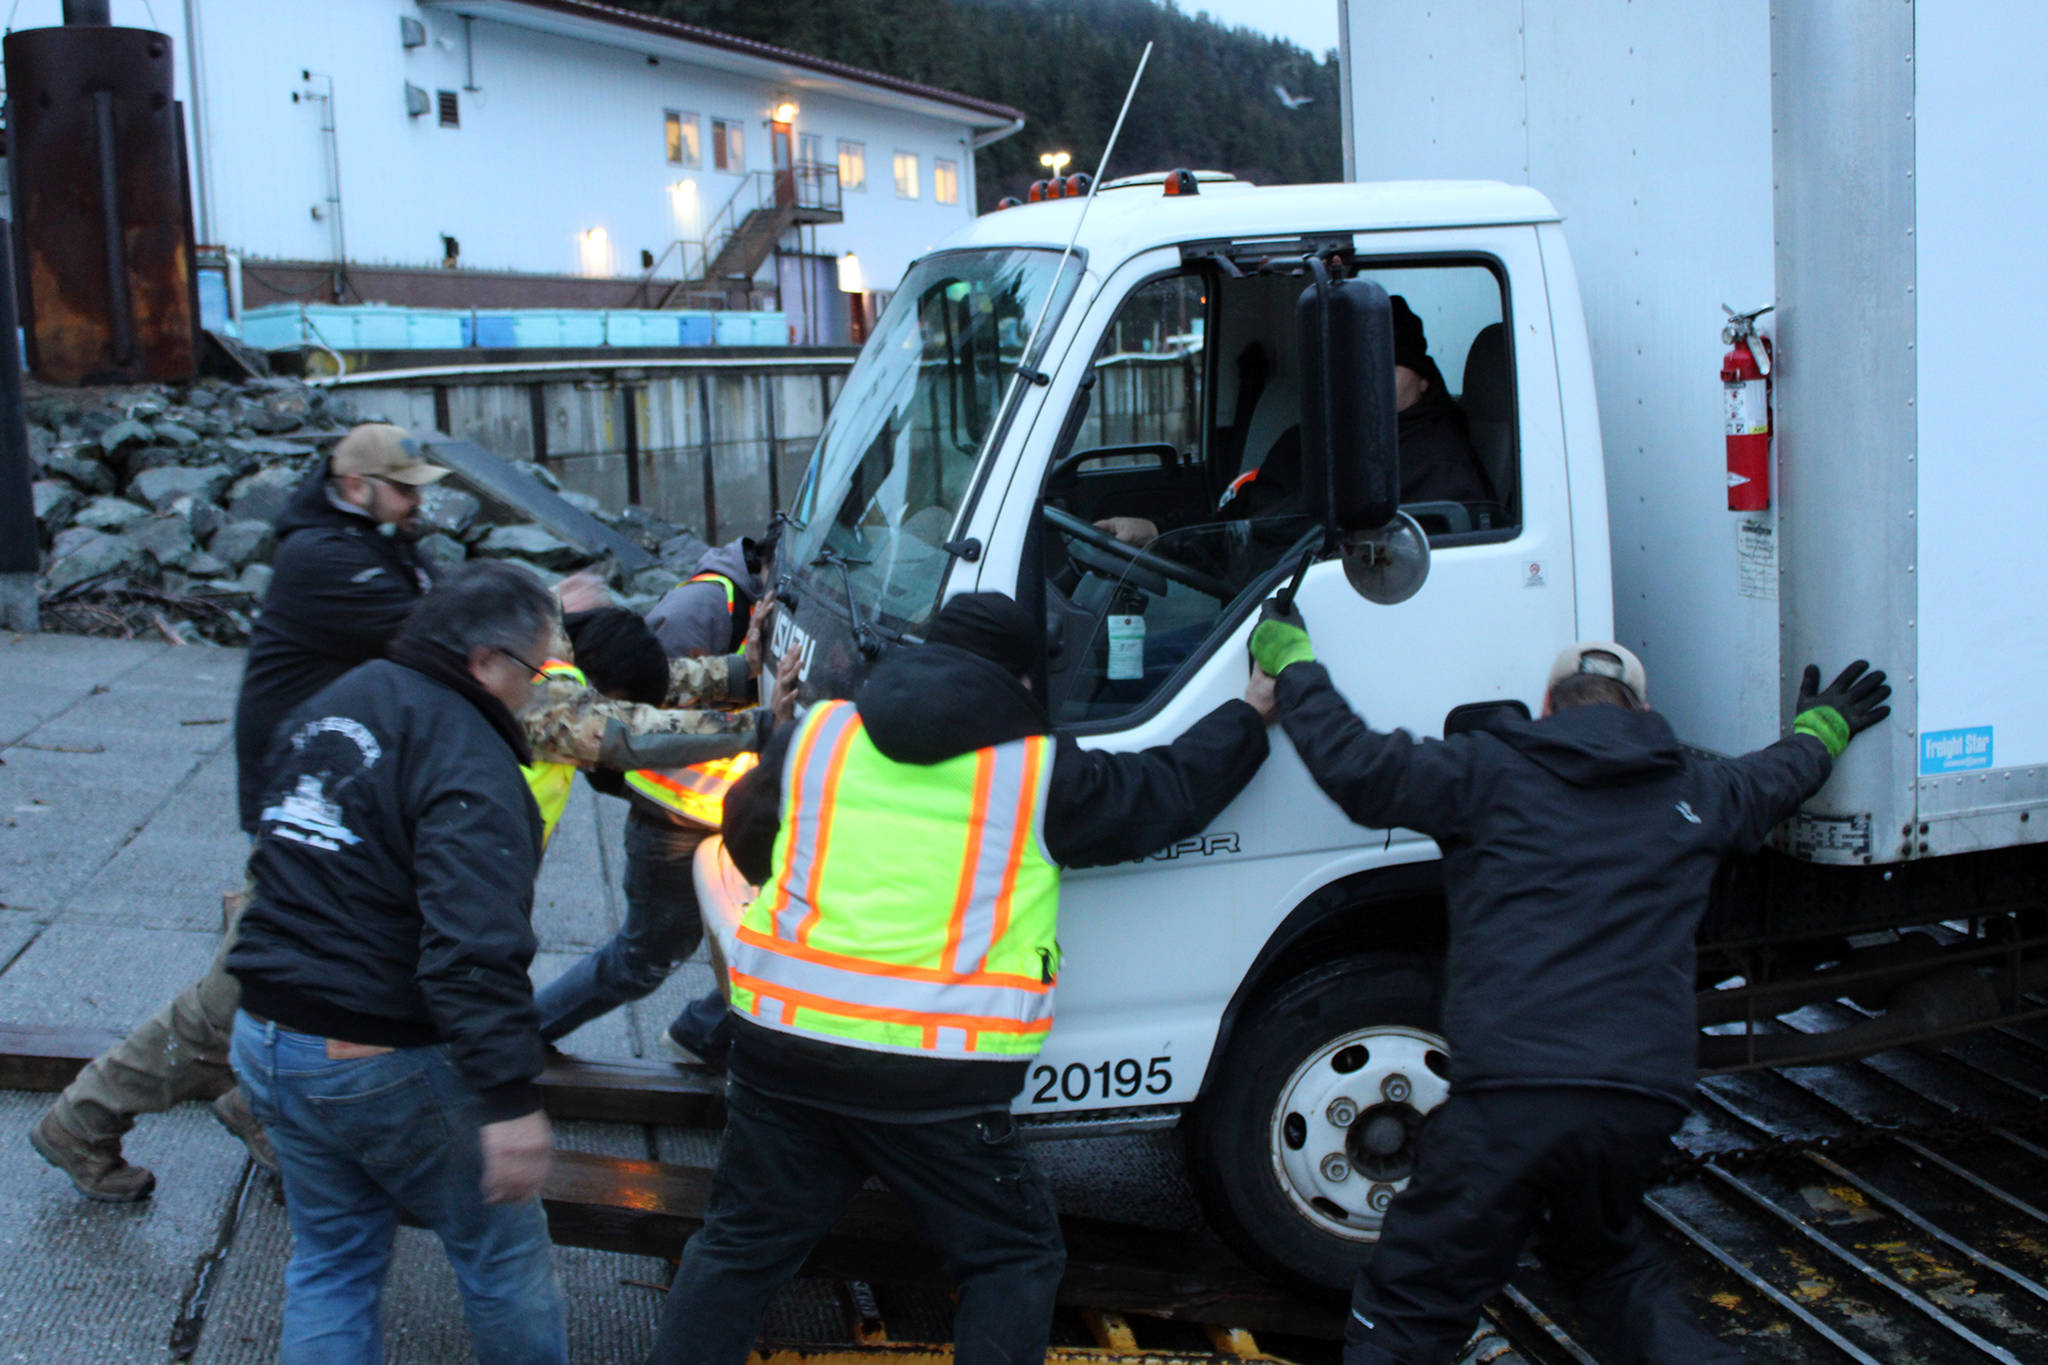 Personnel from the Central Council Tlingit and Haida Indian Tribes of Alaska load a box truck aboard the vessel Frontrunner for transit to Haines to provide relief and assistance in recovery efforts in Haines following catastrophic rainfall-fueled landslides, Dec. 3, 2020. (Ben Hohenstatt / Juneau Empire)